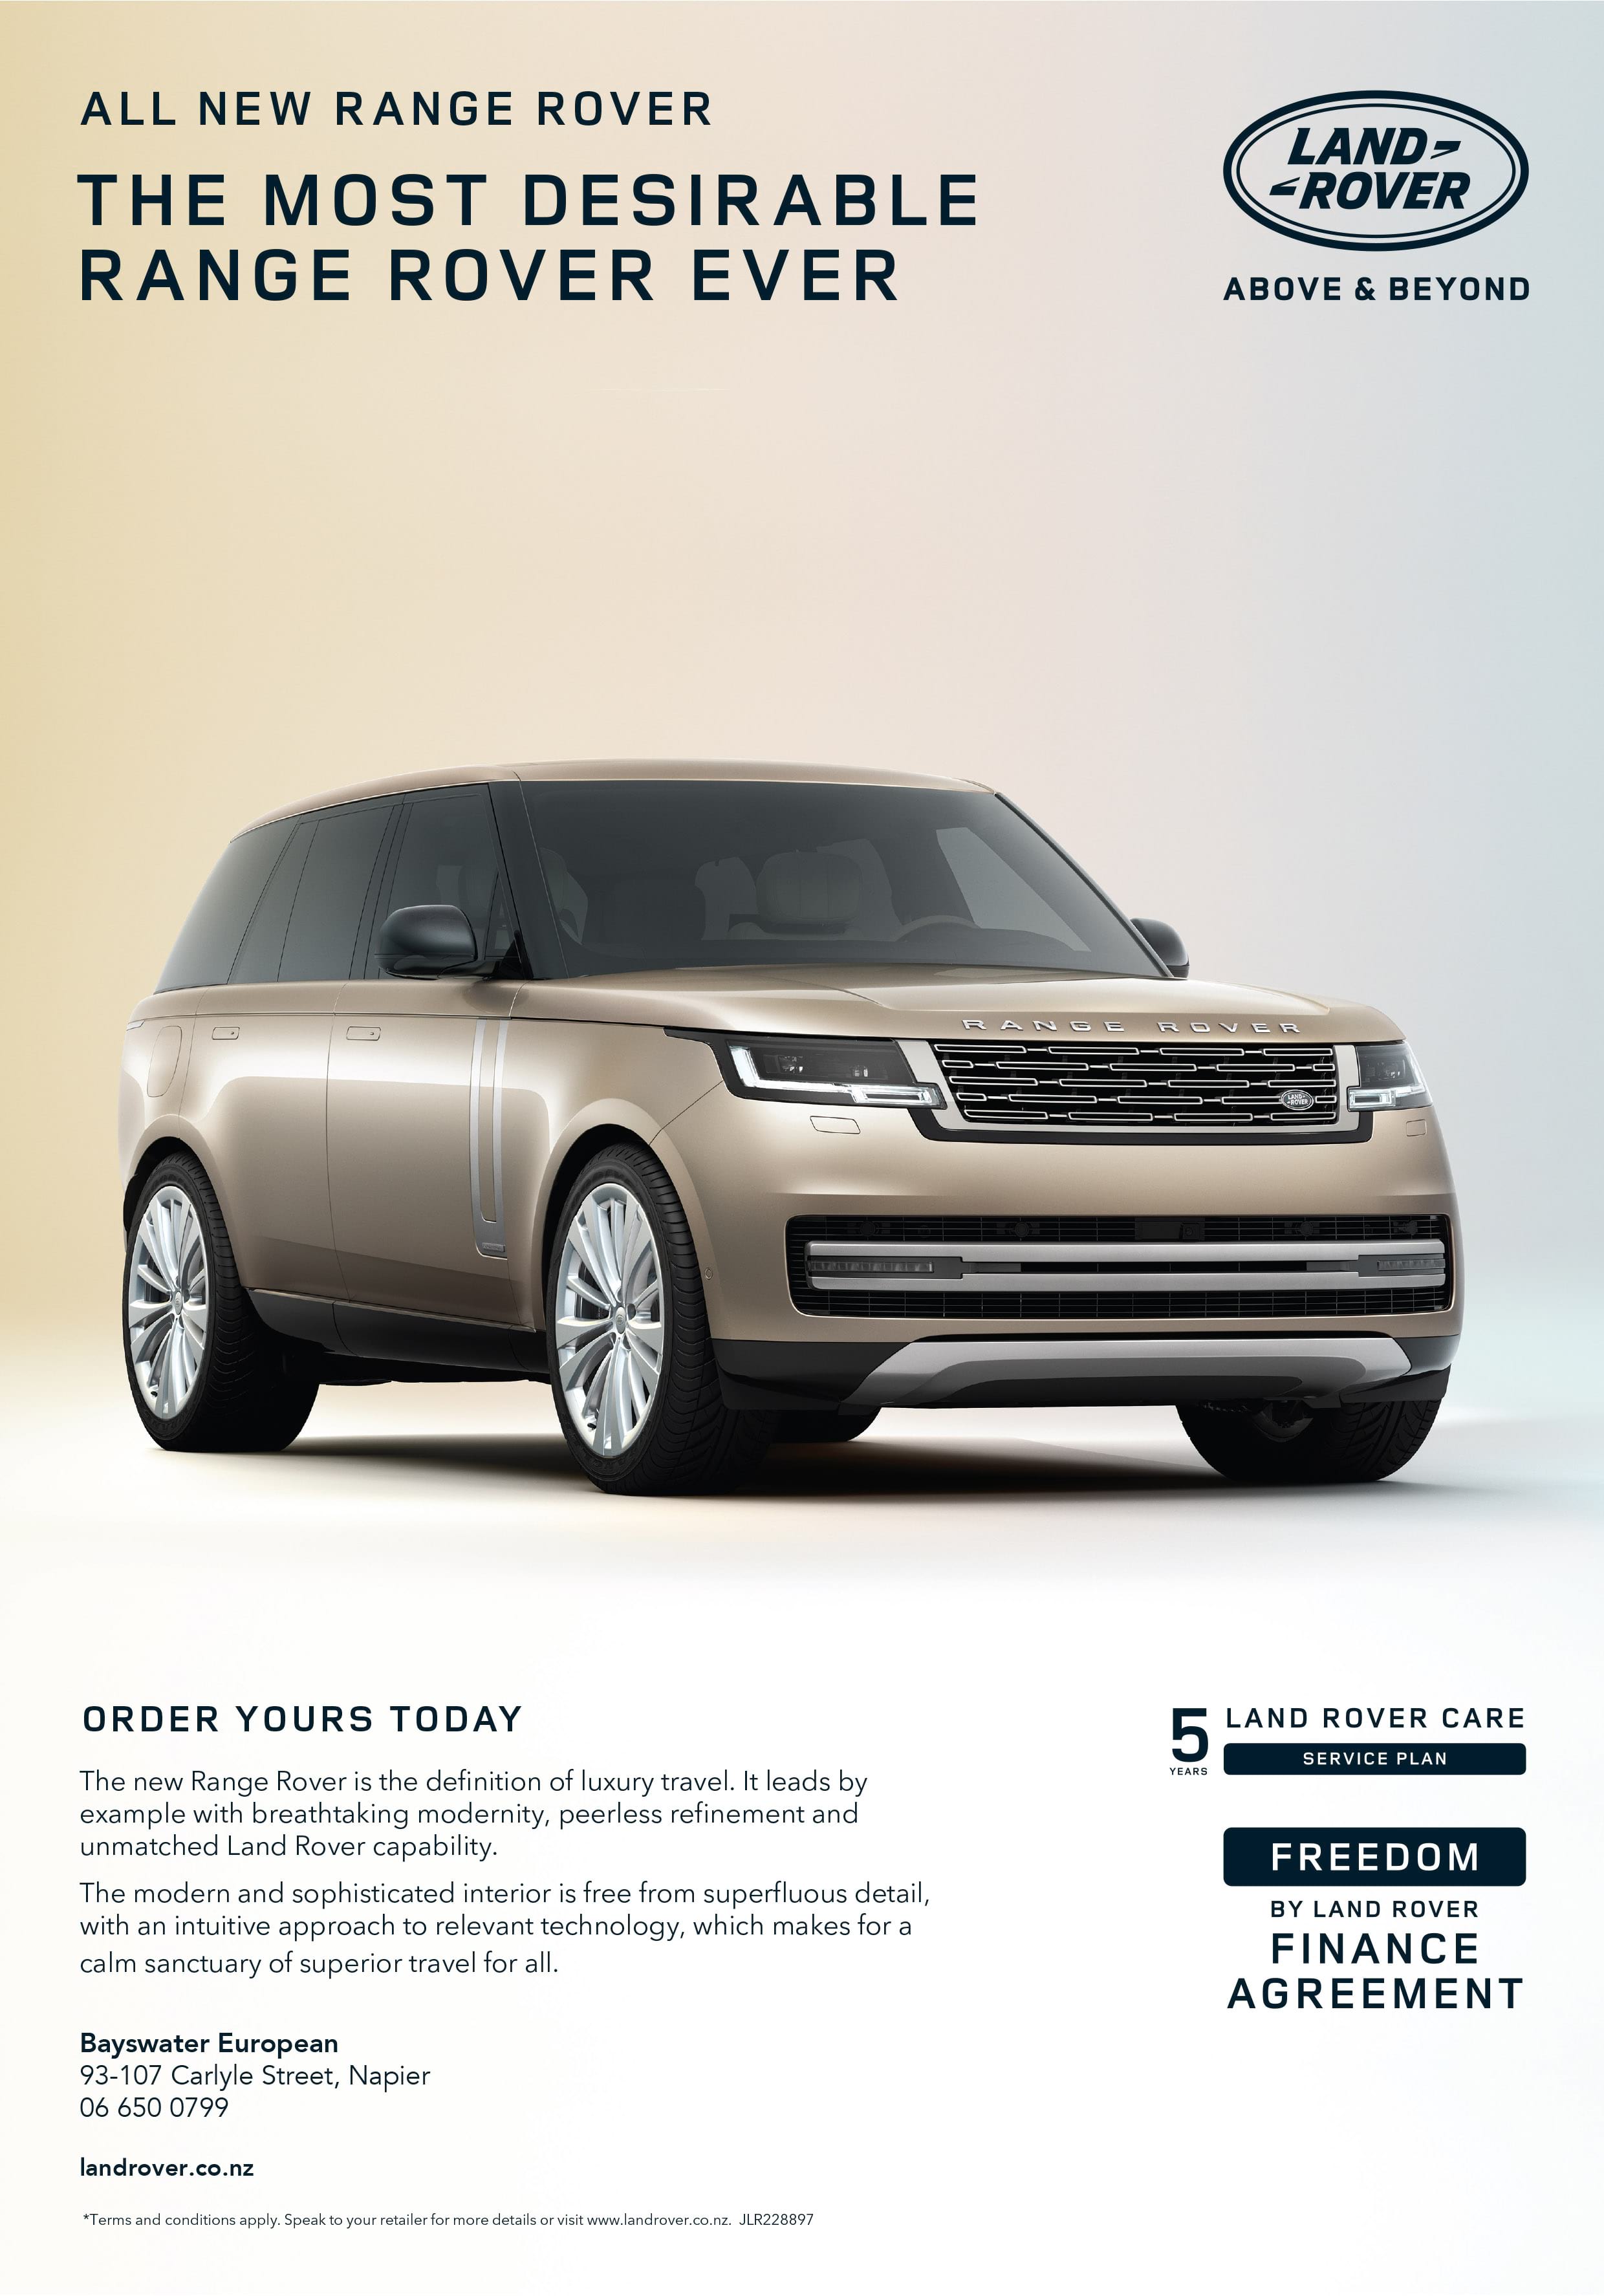 Land Rover Offers